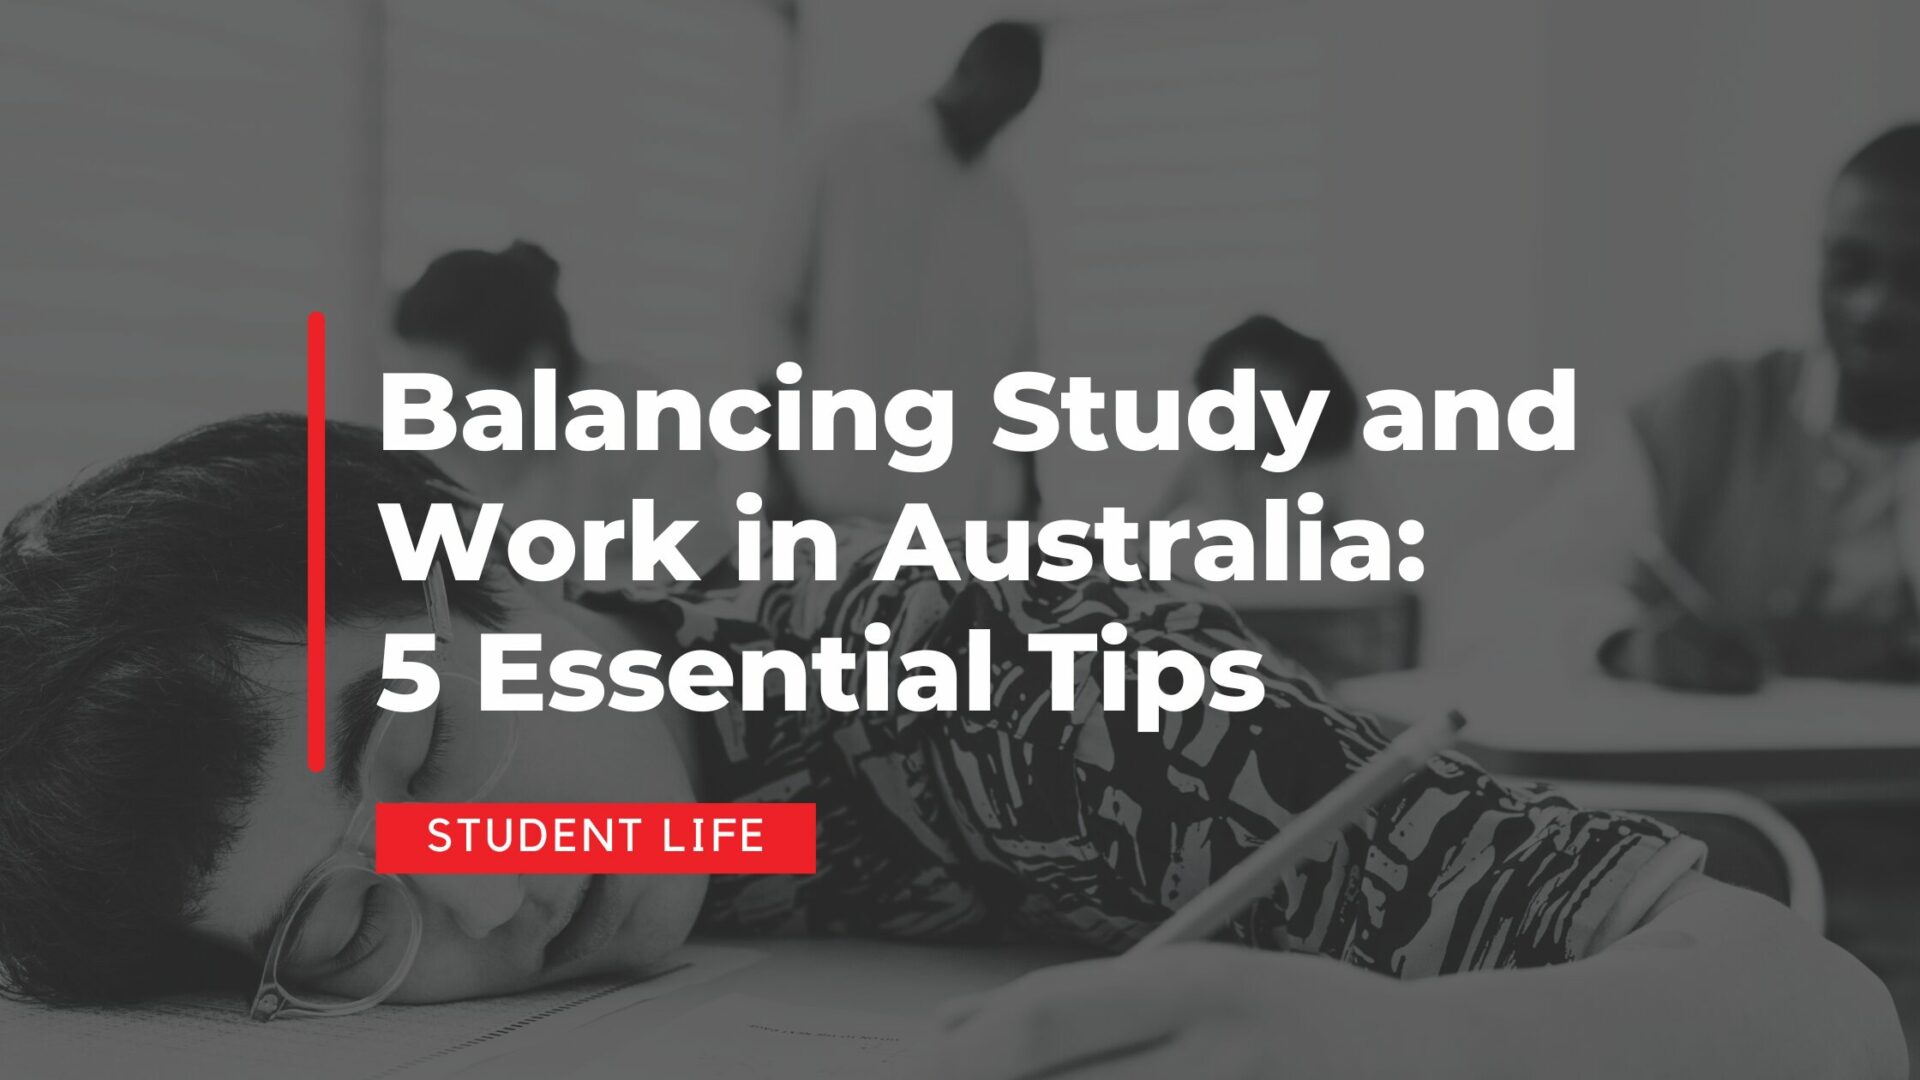 Balancing Study and Work in Australia: 5 Essential Tips